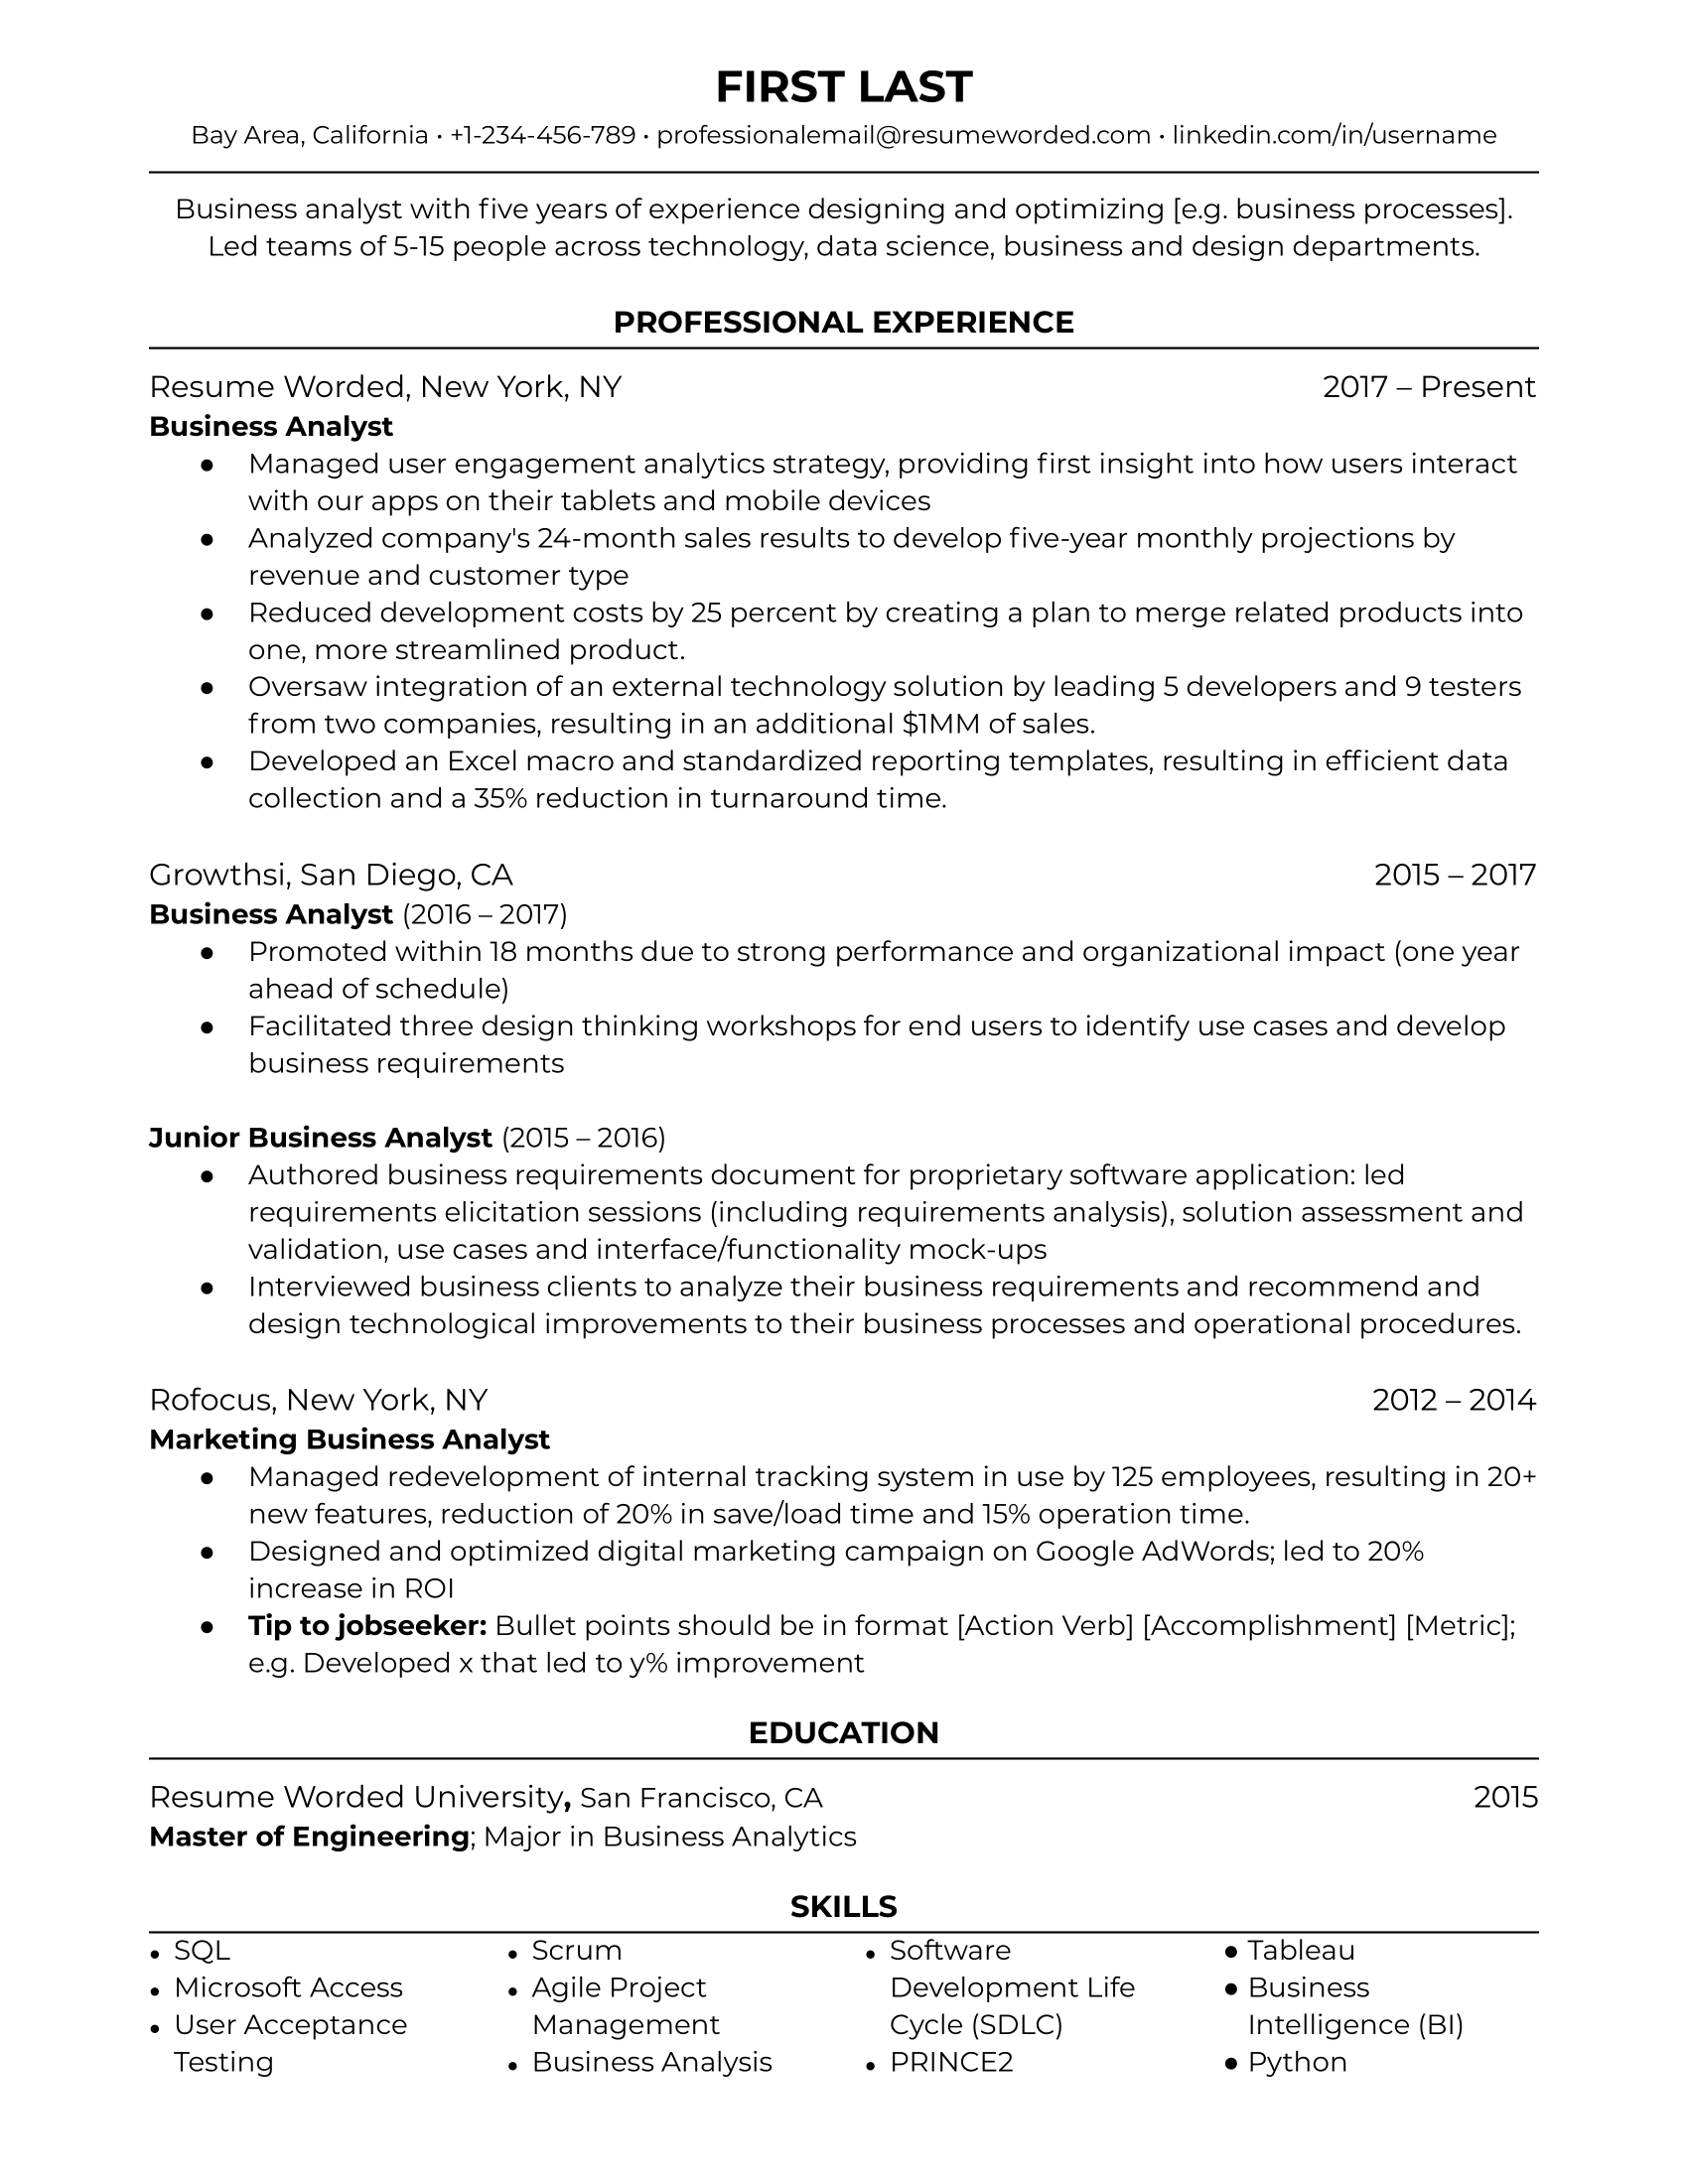 Business analyst resume sample with prominent skills section, action verbs, and work experience bullet points